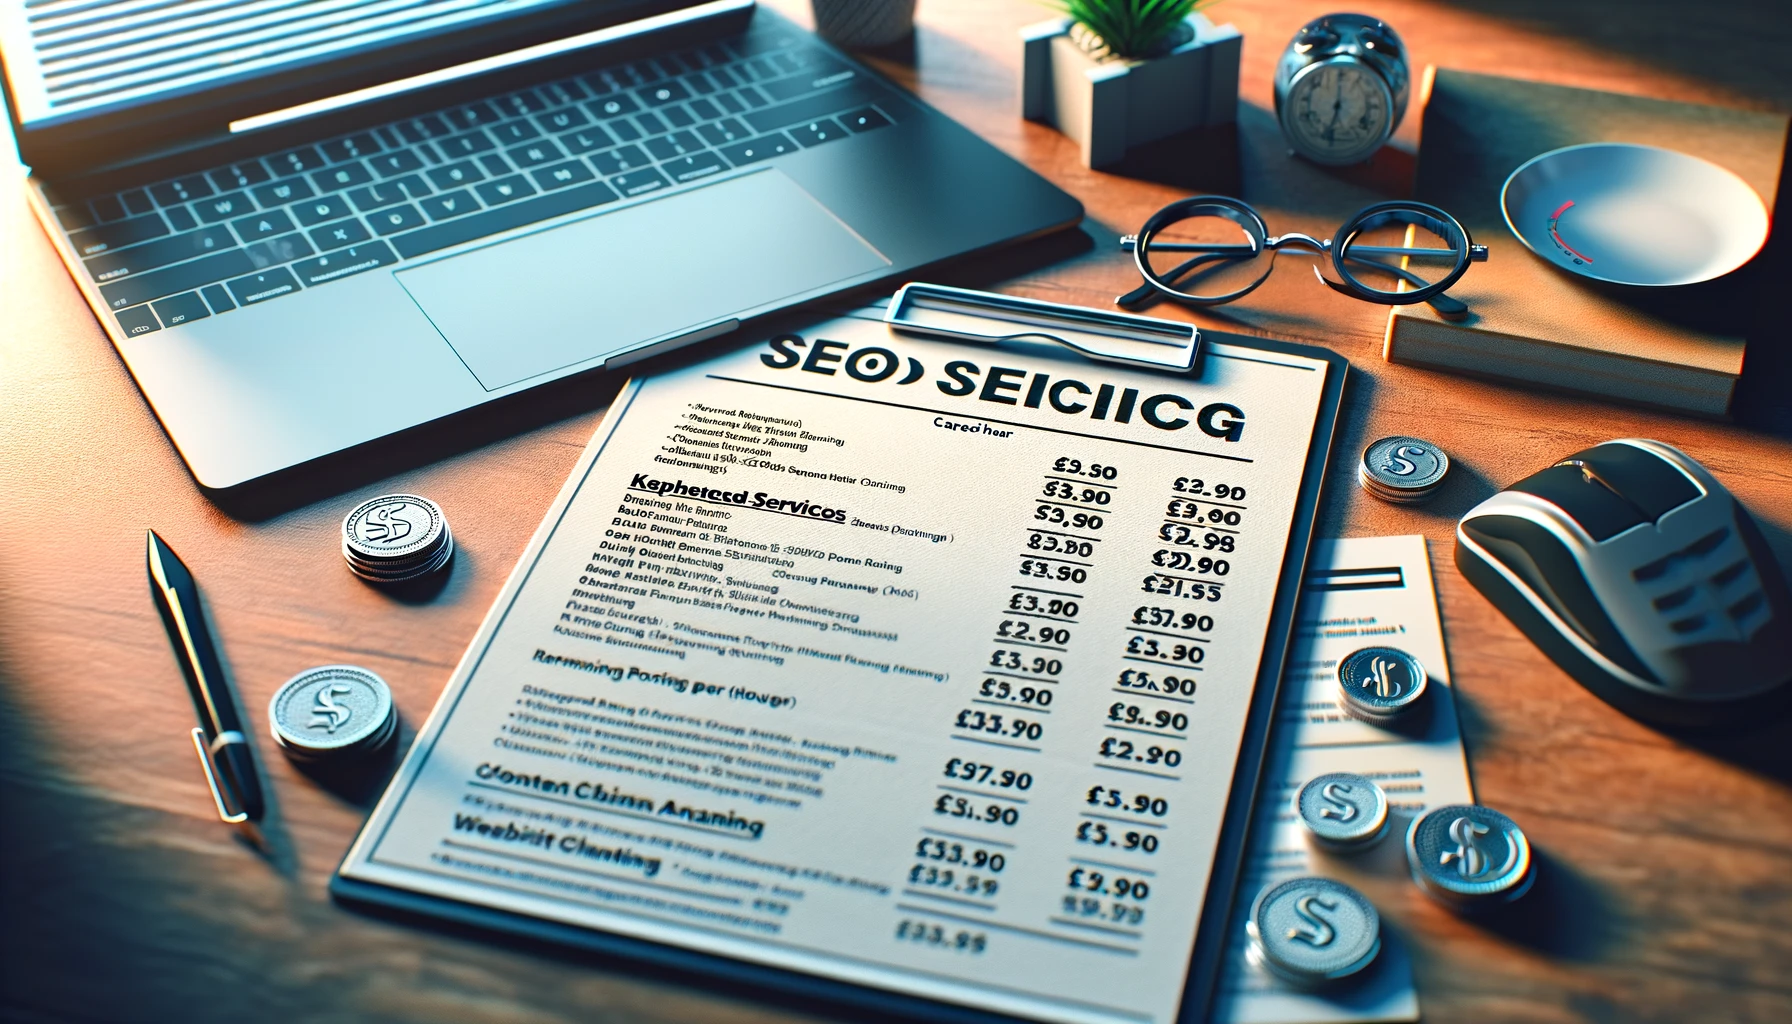 how much does seo charge per hour